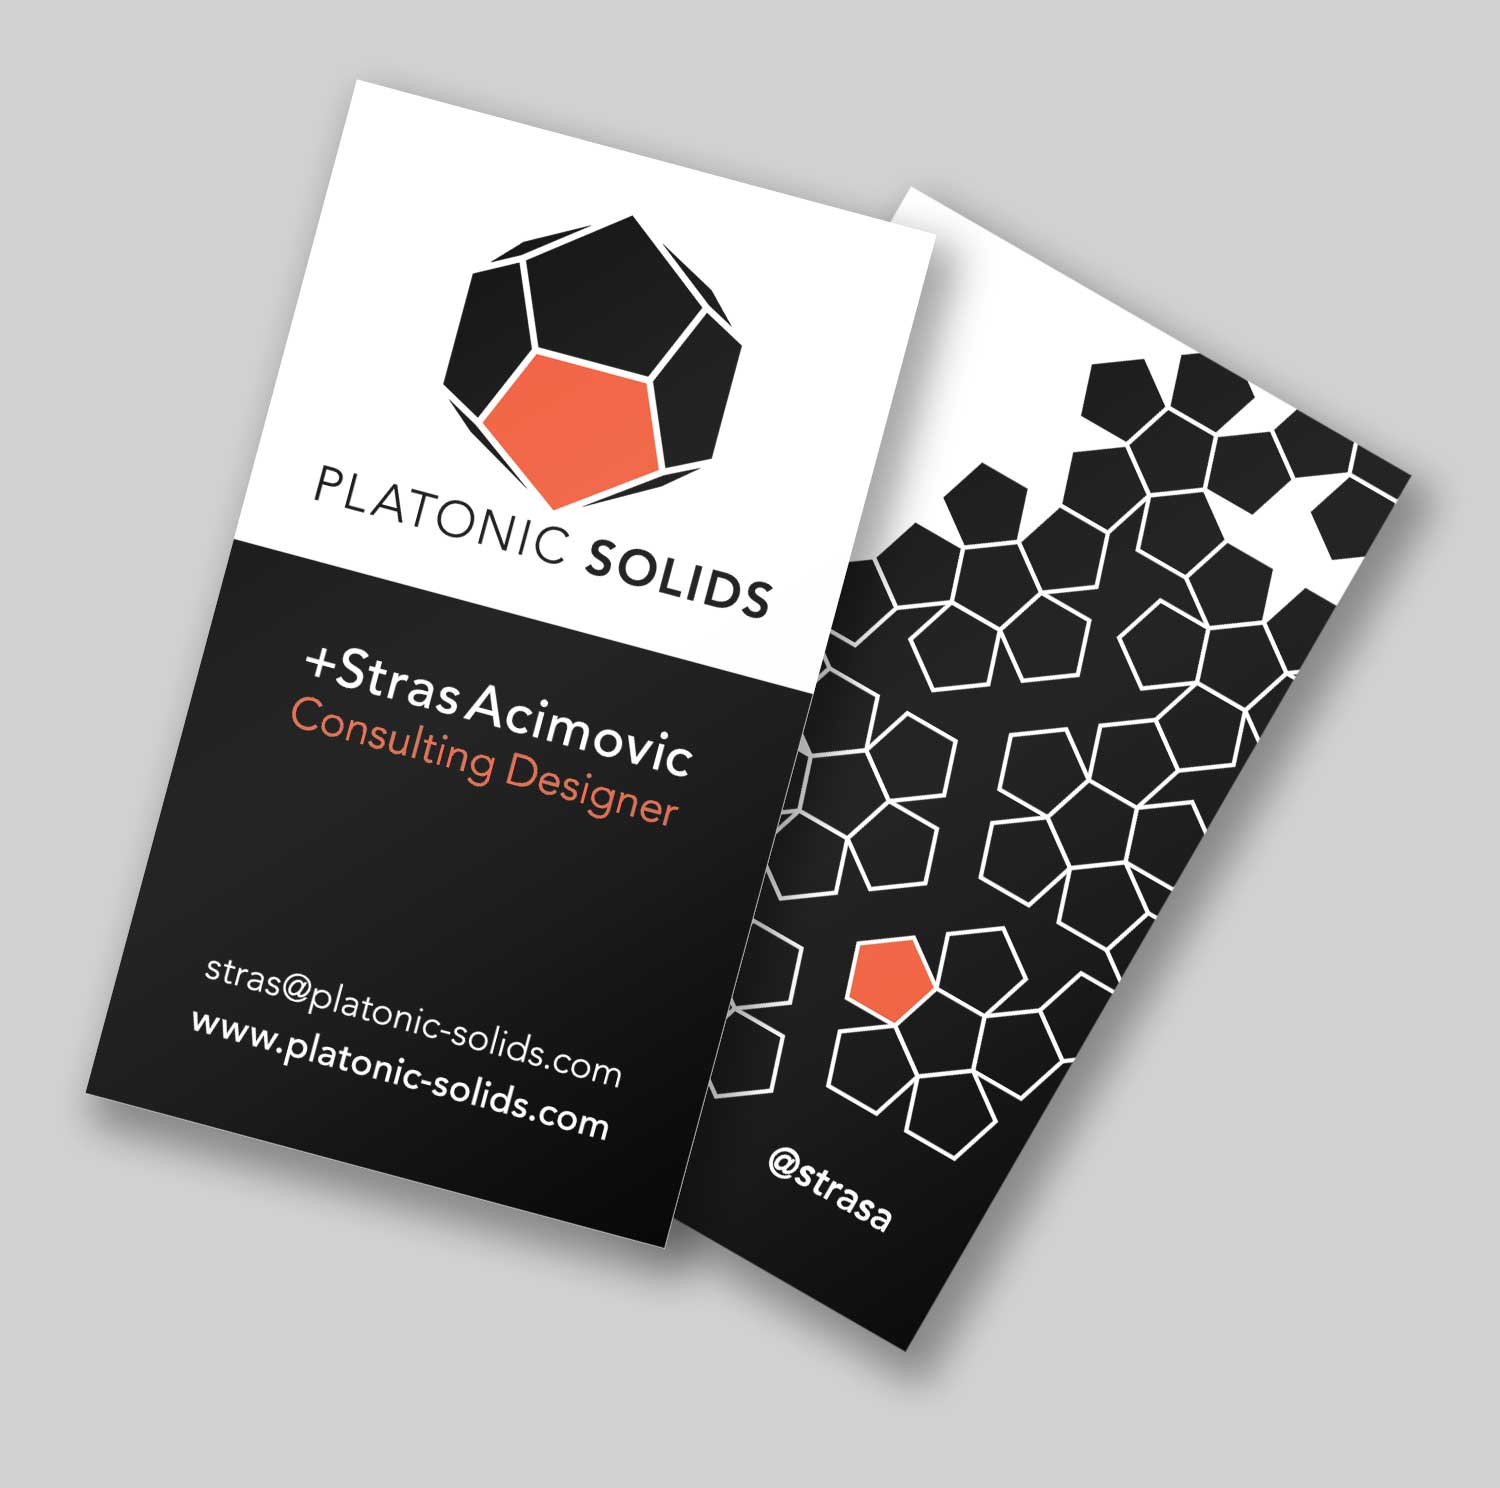 A business card in vertical layout, with front and back designs